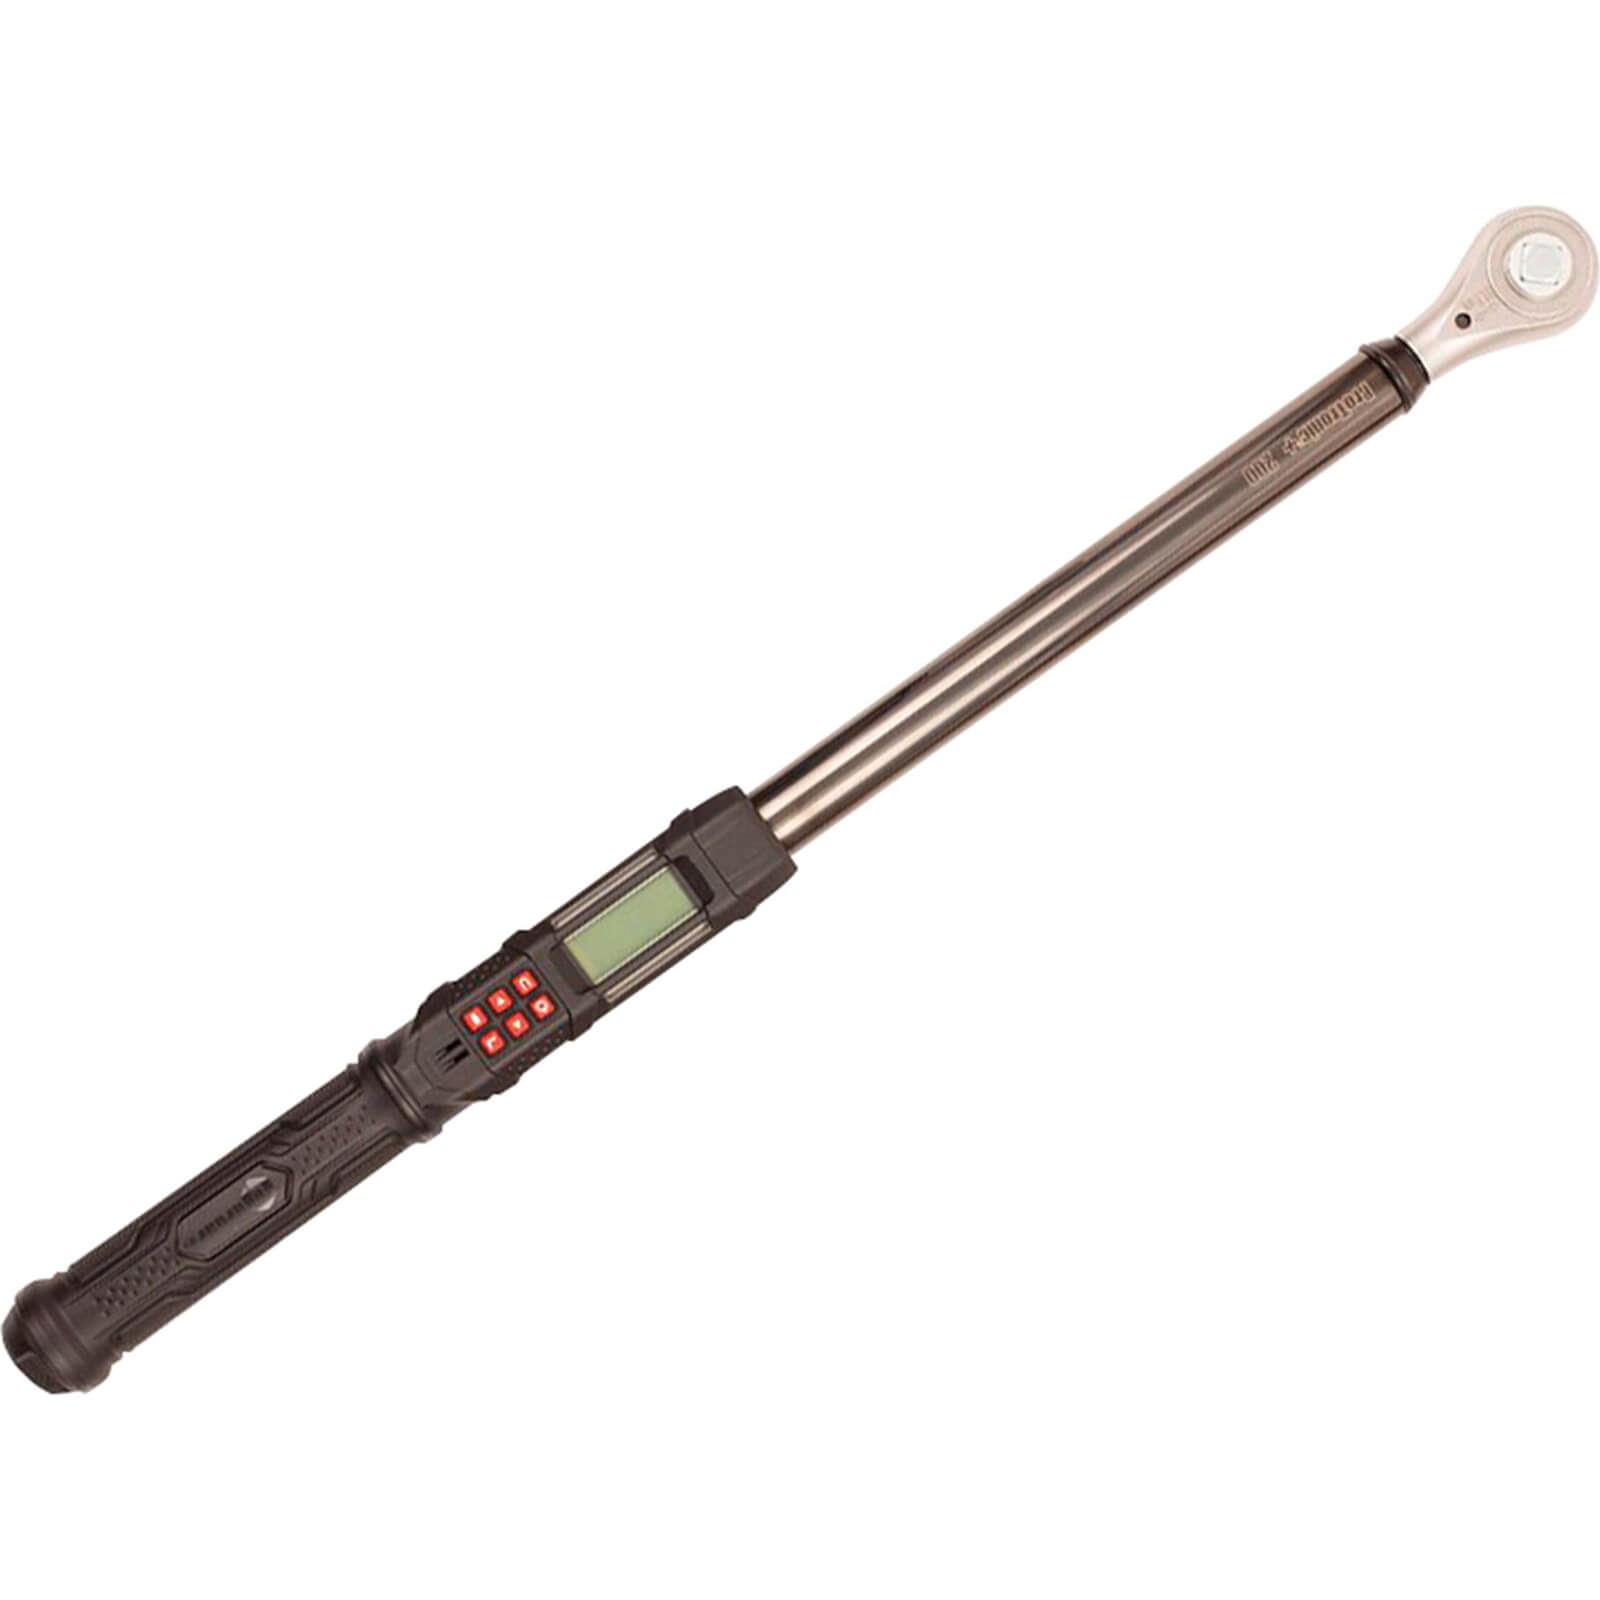 Image of Norbar Protronic Plus Torque Wrench 1/2" Drive 1/2" 10Nm - 200Nm